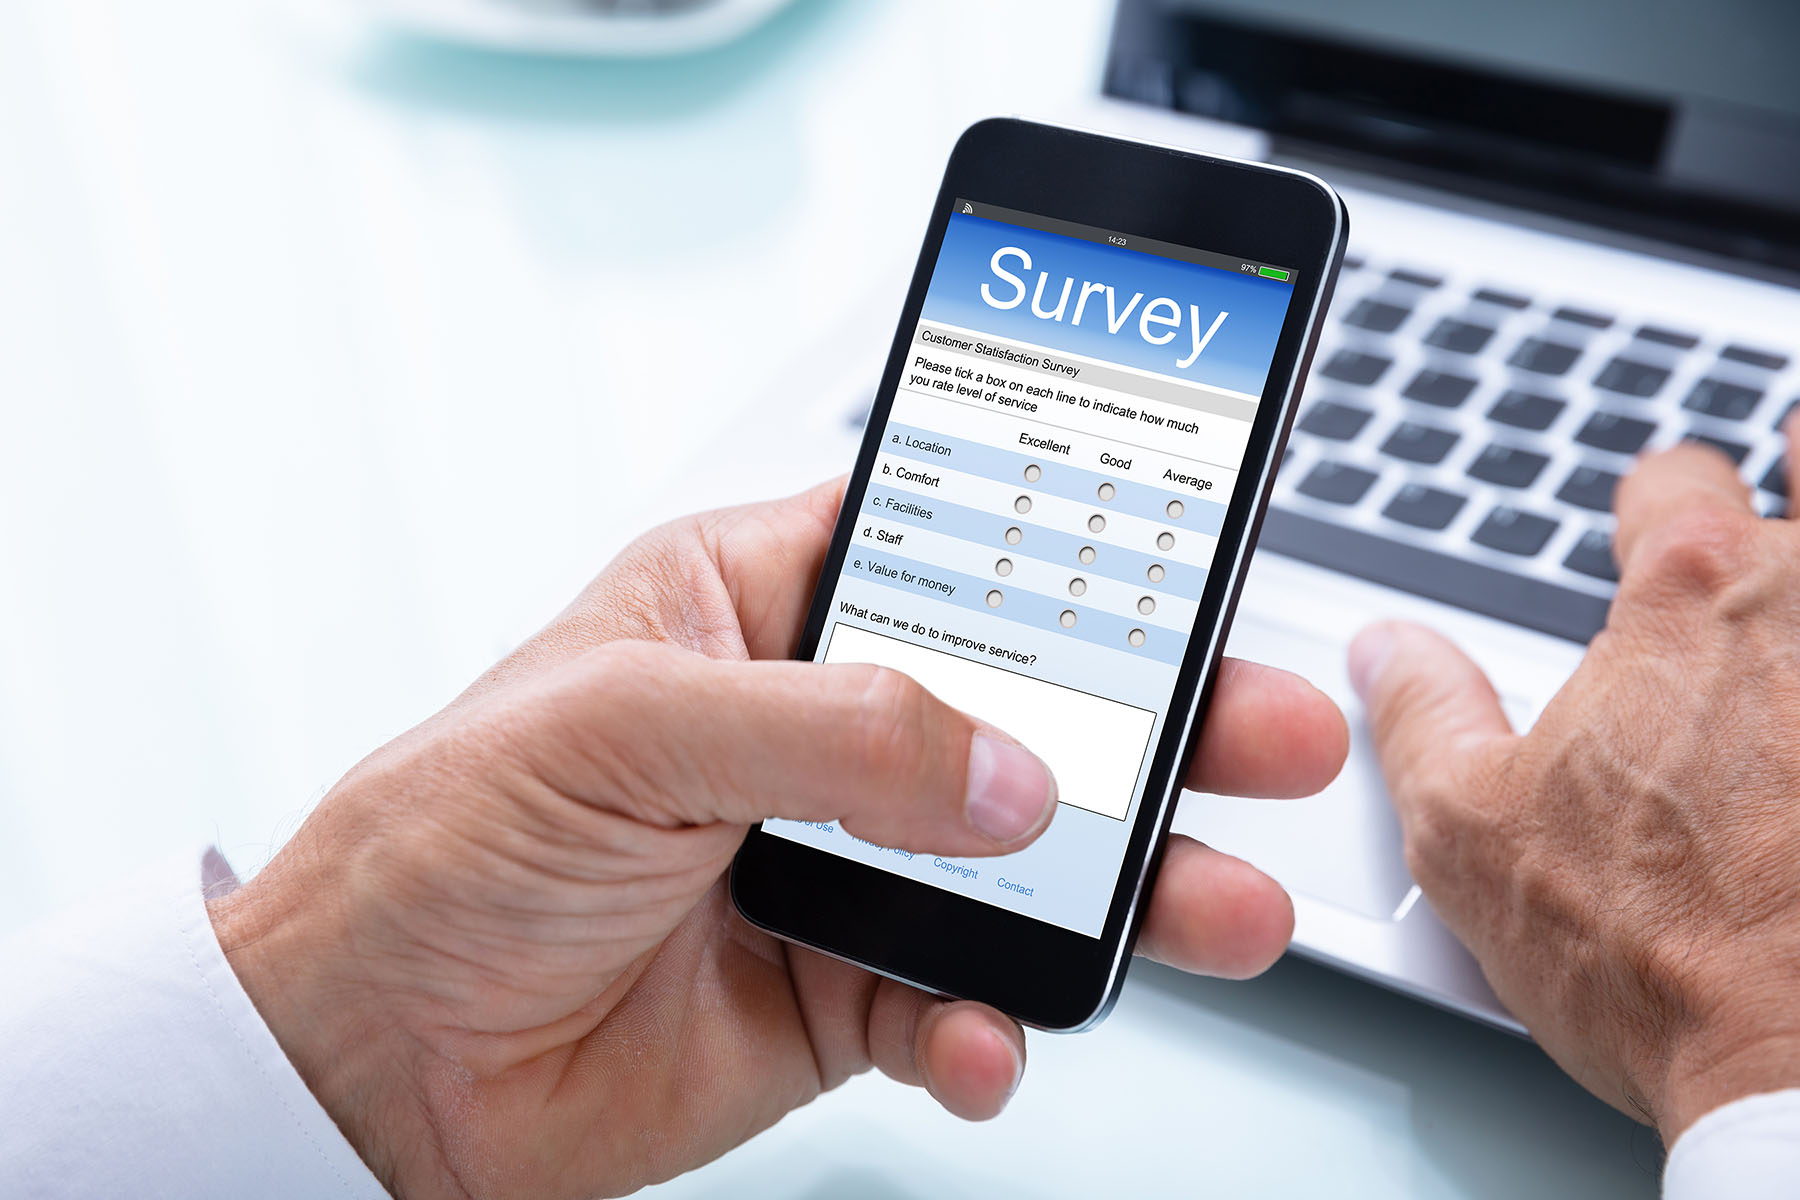 A man's hand holding a phone. On the phone's screen, it says "Survey" with a sample question from a customer satisfaction survey. 